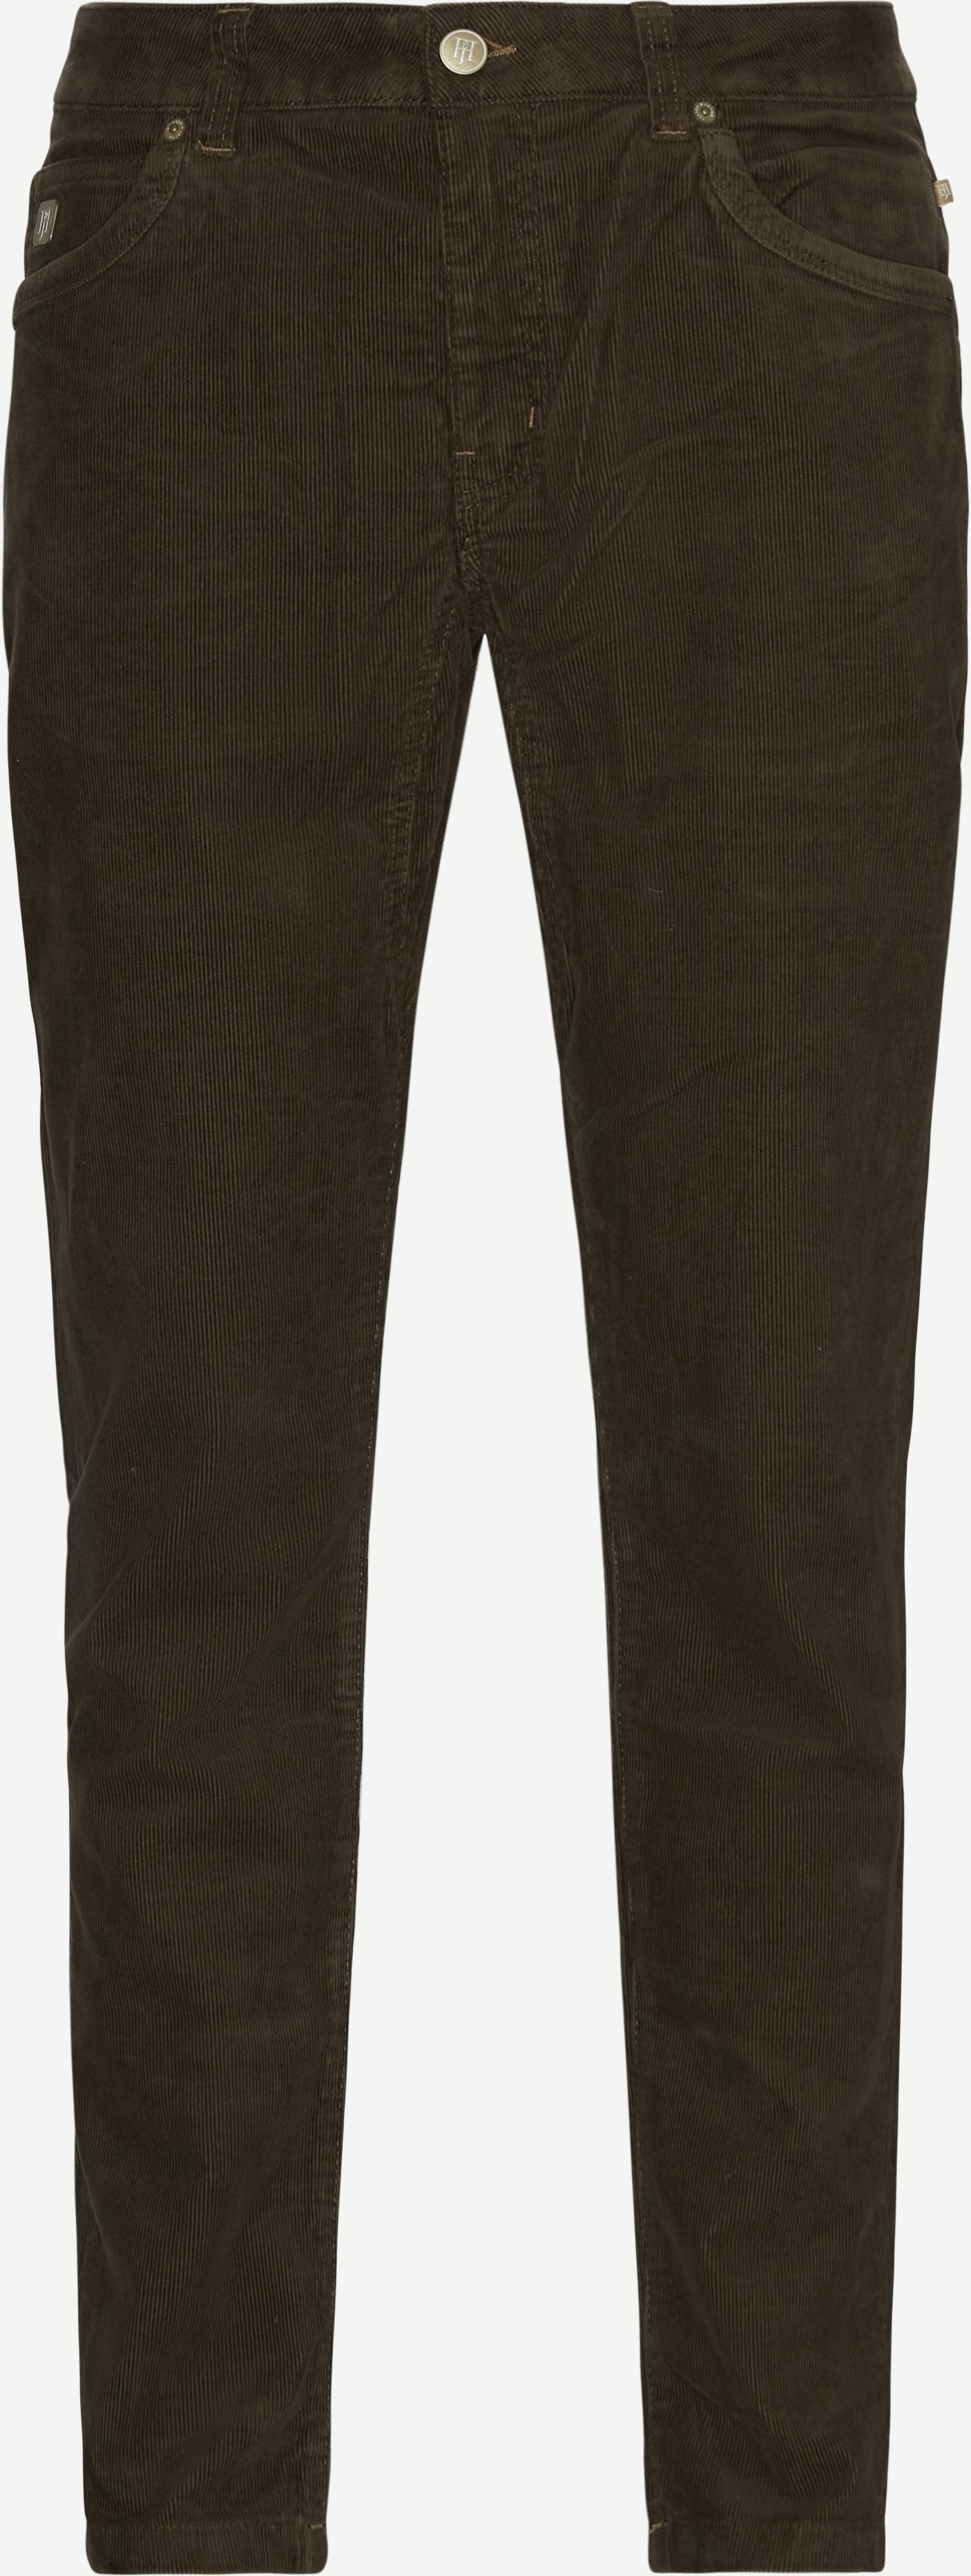 Jeans - Modern fit - Brown